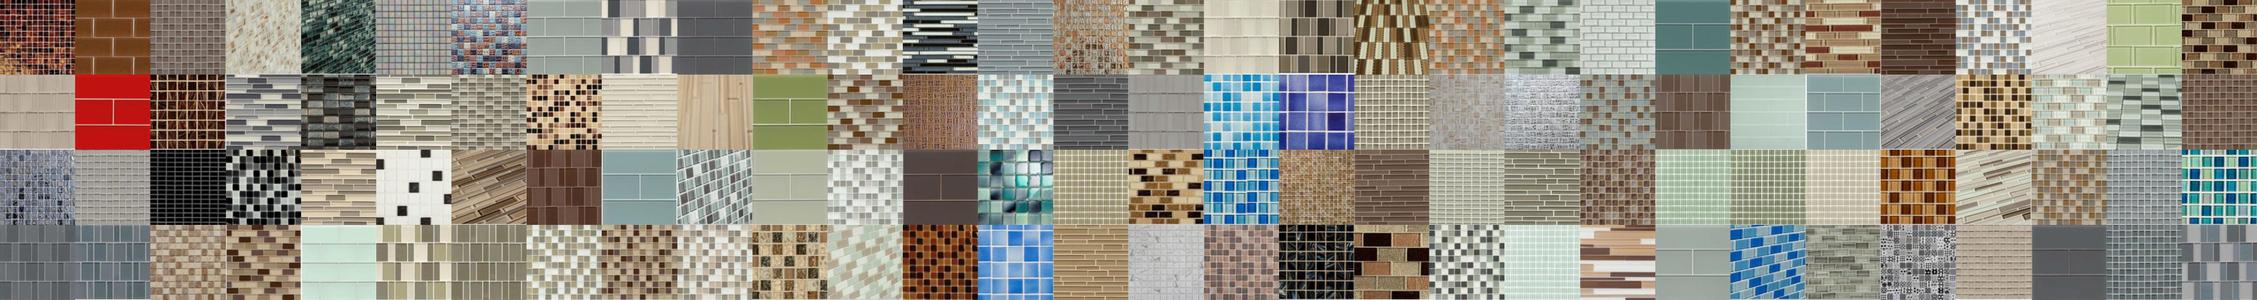 A collage of glass-mosaic